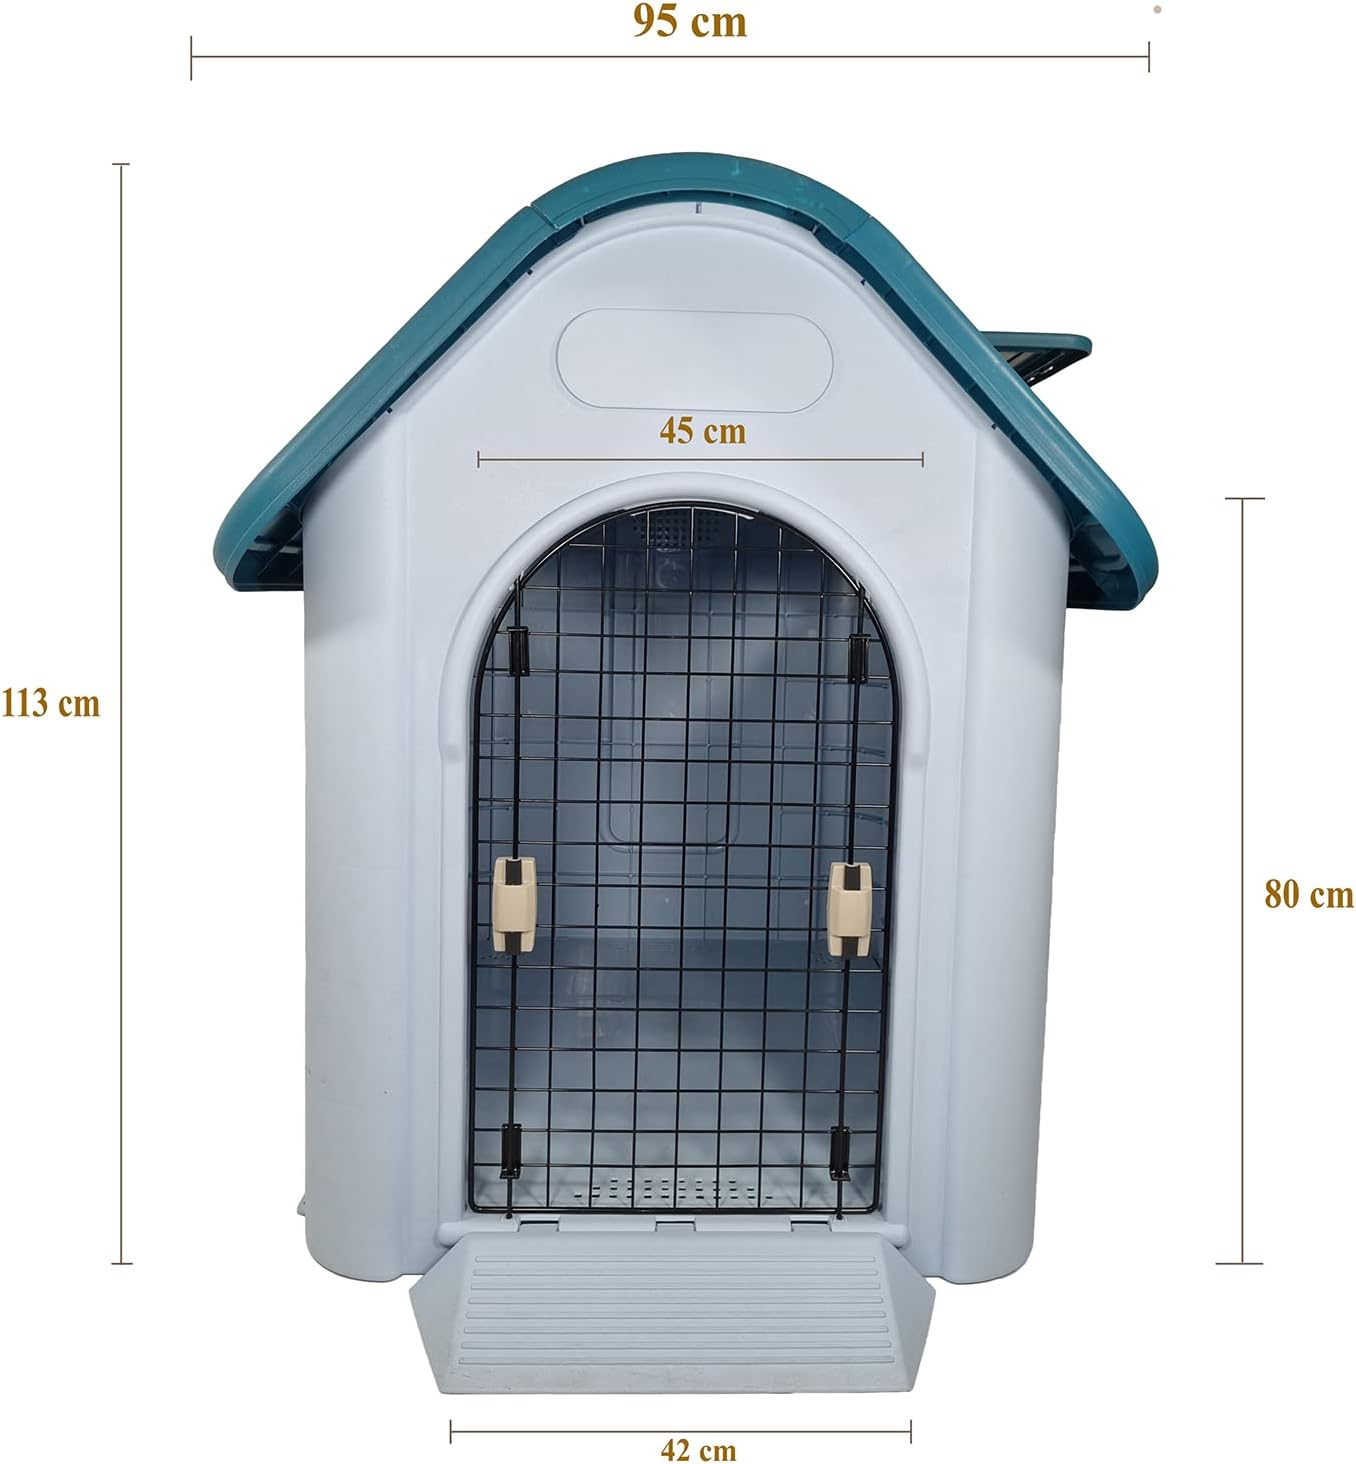 Dog House, Kennel, Indoor / Outdoor Pet House, Thick PP Plastic, Rust &amp; Corrosion Resistant, Portable Dog Shelter, Strong Design, Sturdy, Easy to Clean, Grey + Blue-Green mix color cage, 113 cm height